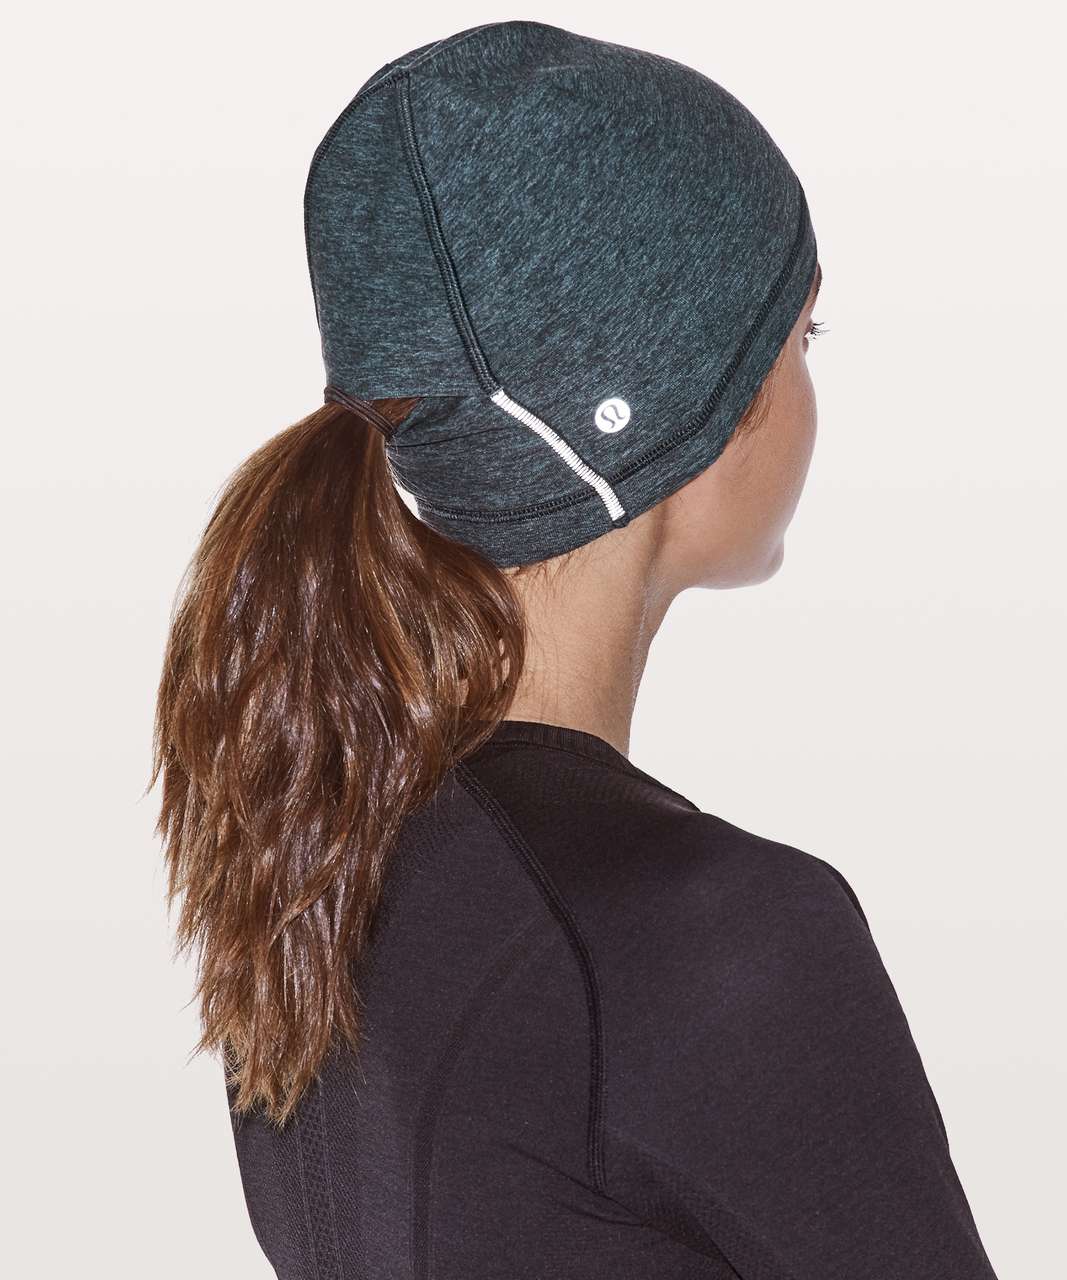 Lululemon Run It Out Toque - Heathered Nocturnal Teal